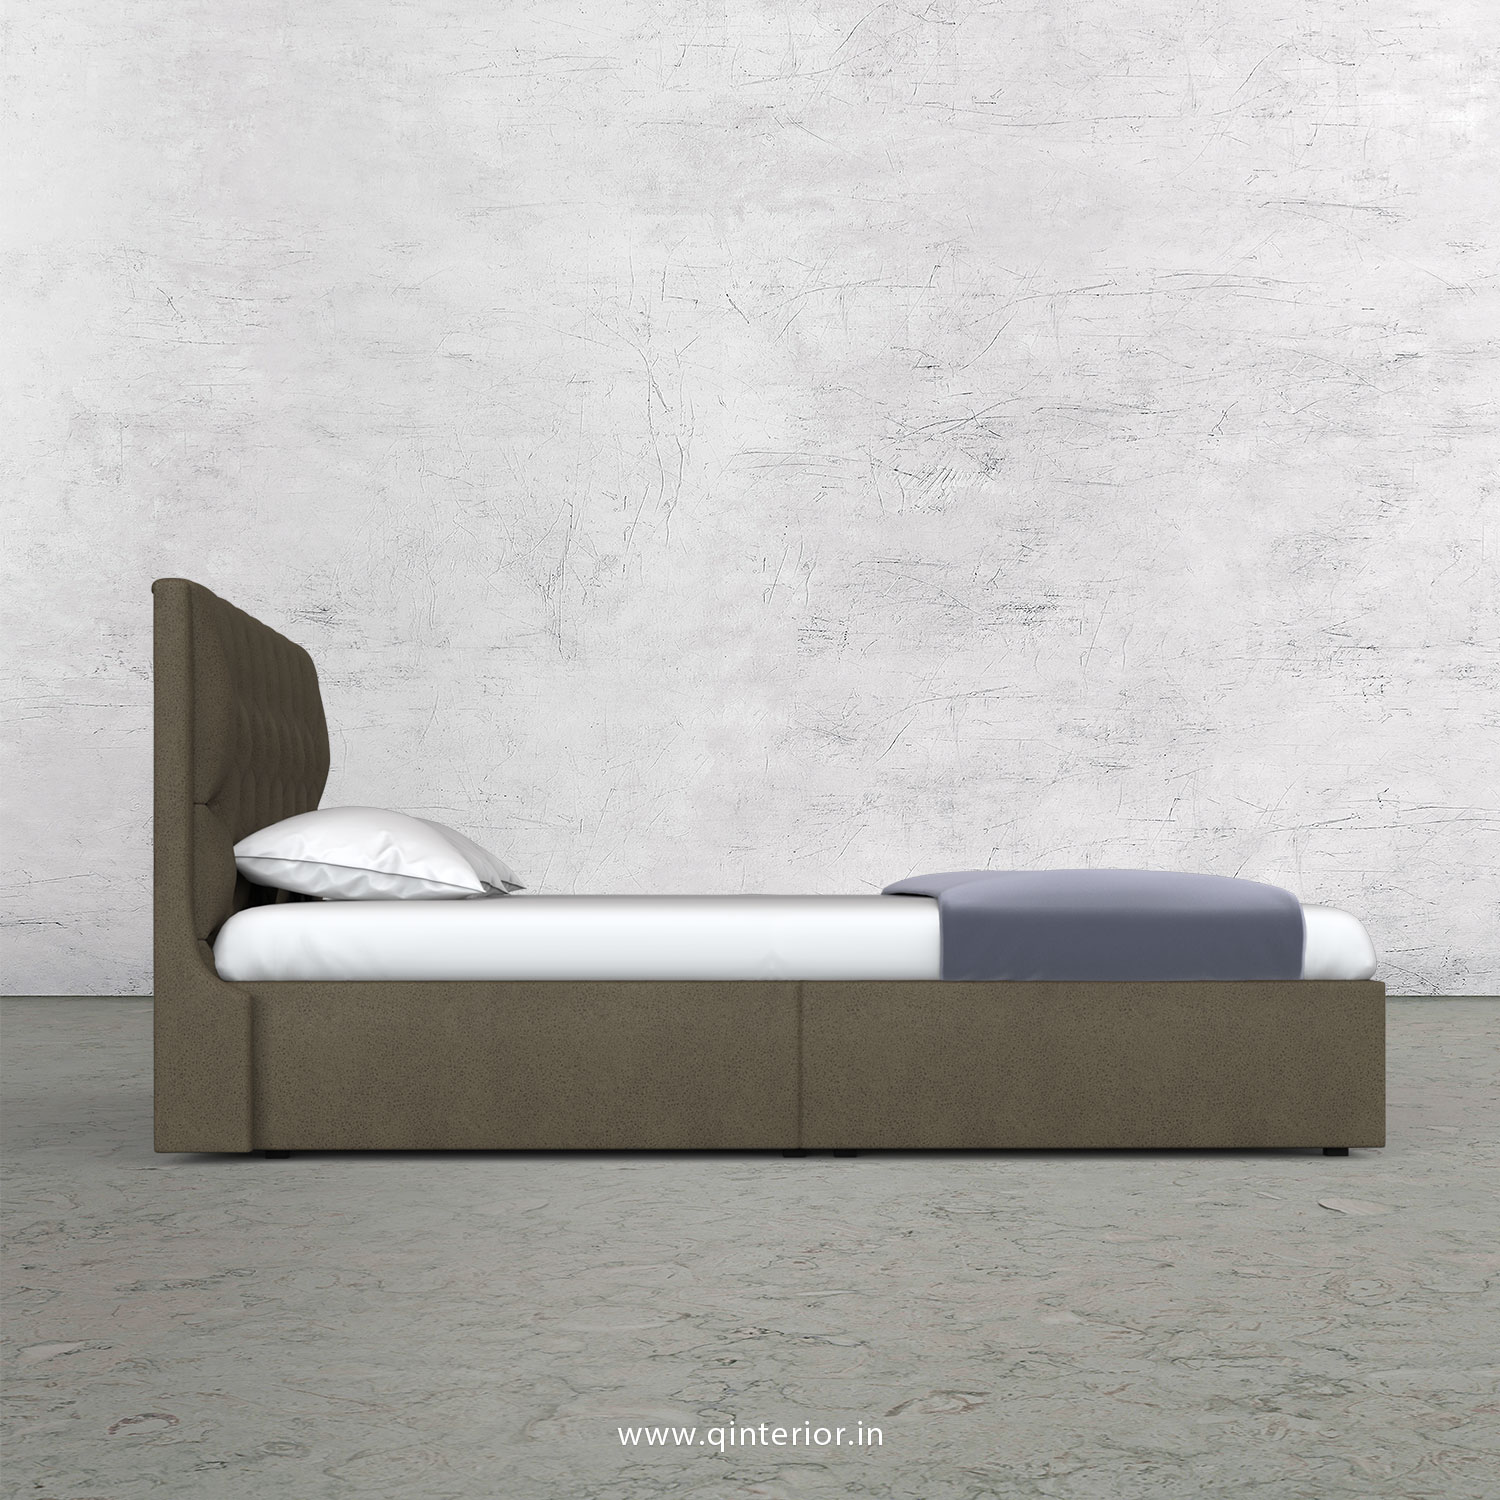 Scorpius Queen Storage Bed in Fab Leather Fabric - QBD001 FL06